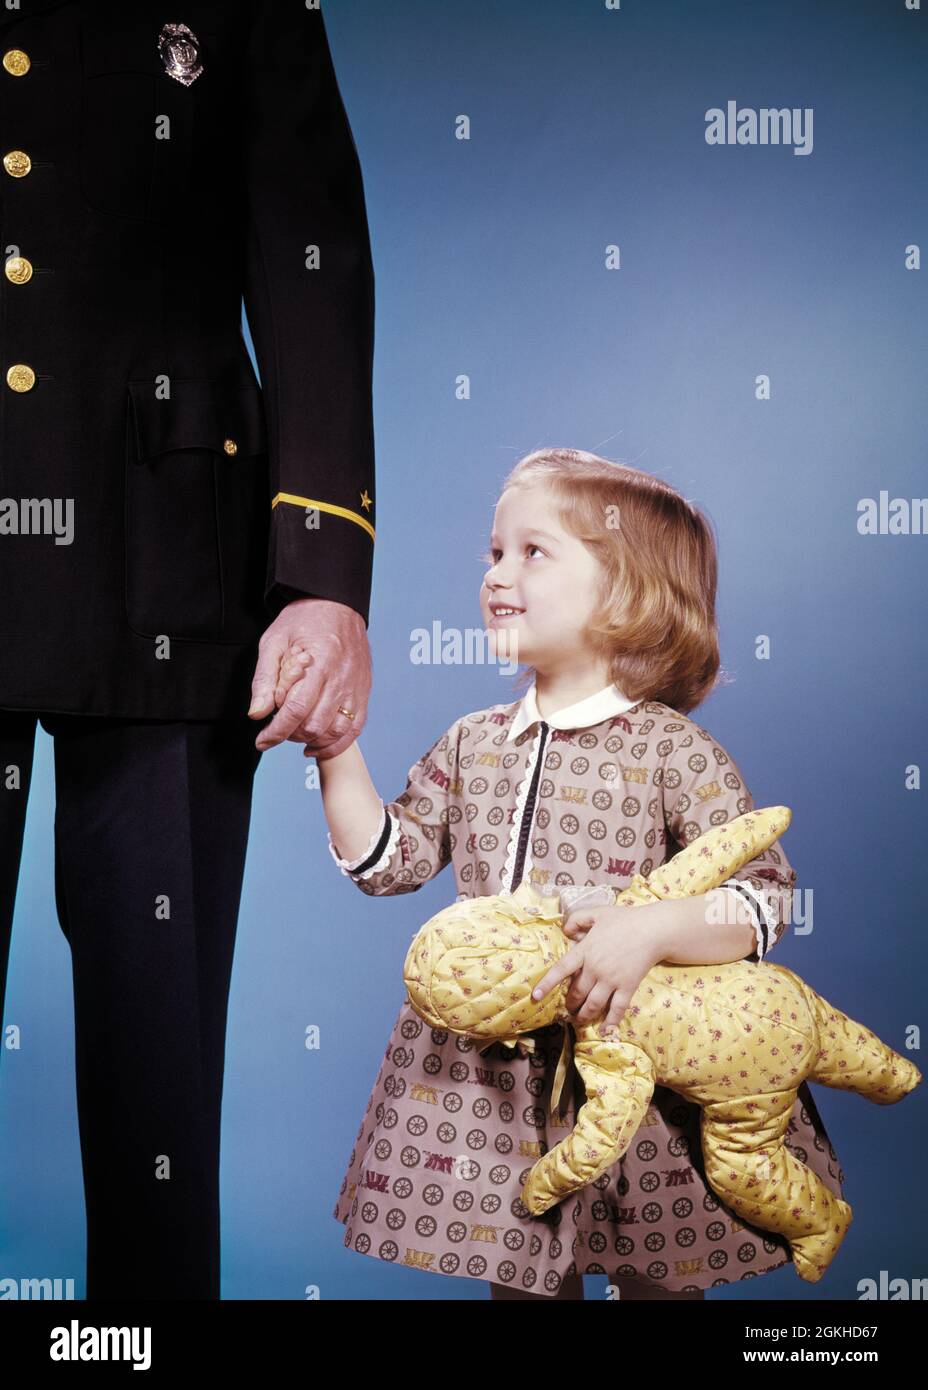 1960s LITTLE GIRL WITH YELLOW TOY DOLL HOLDING HAND OF POLICEMAN HELPING HER - kj1494 HAR001 HARS NOSTALGIA OLD FASHION 1 POLICEMAN JUVENILE FACIAL SERVE LOST PLEASED JOY LIFESTYLE FEMALES STUDIO SHOT COPY SPACE HALF-LENGTH PERSONS CARING MALES ORDER OFFICER EXPRESSIONS TRUST COP PROTECT CHEERFUL ADVENTURE AND FOUND LOW ANGLE OCCUPATIONS SMILES UNIFORMS CONCEPTUAL TRUSTING JOYFUL TRUSTWORTHY OFFICERS POLICEMEN COPS GROWTH JUVENILES MID-ADULT MID-ADULT MAN BADGE BADGES CAUCASIAN ETHNICITY HAR001 OLD FASHIONED Stock Photo